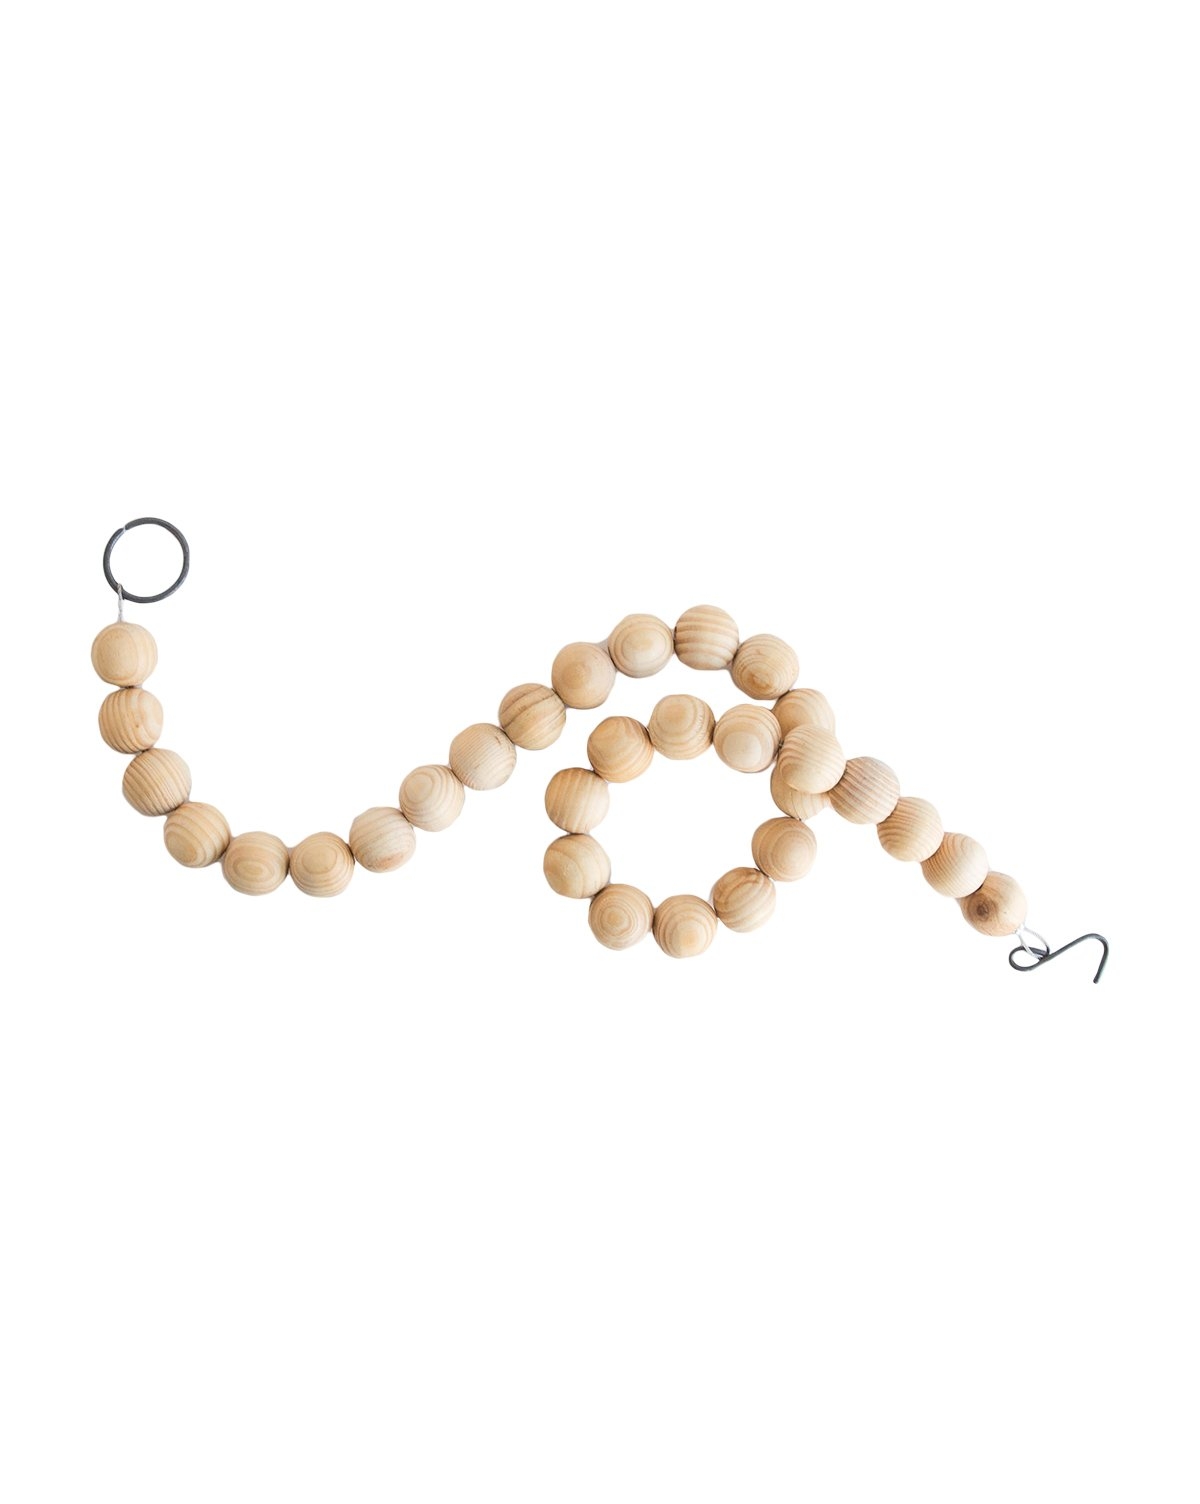 Wooden Beads - Image 4